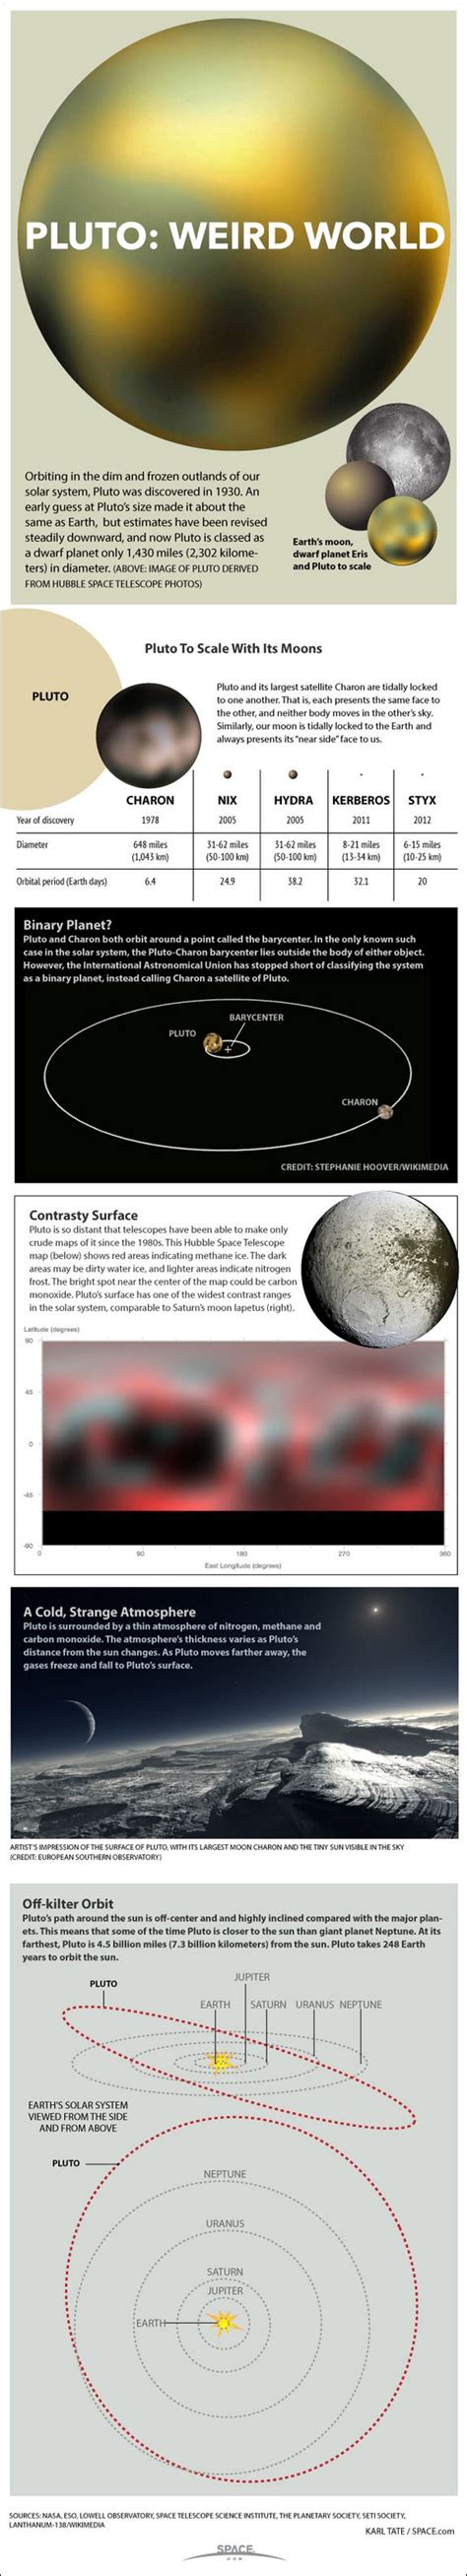 Solar System Planets And Dwarf Planets Infographic Solar System Facts